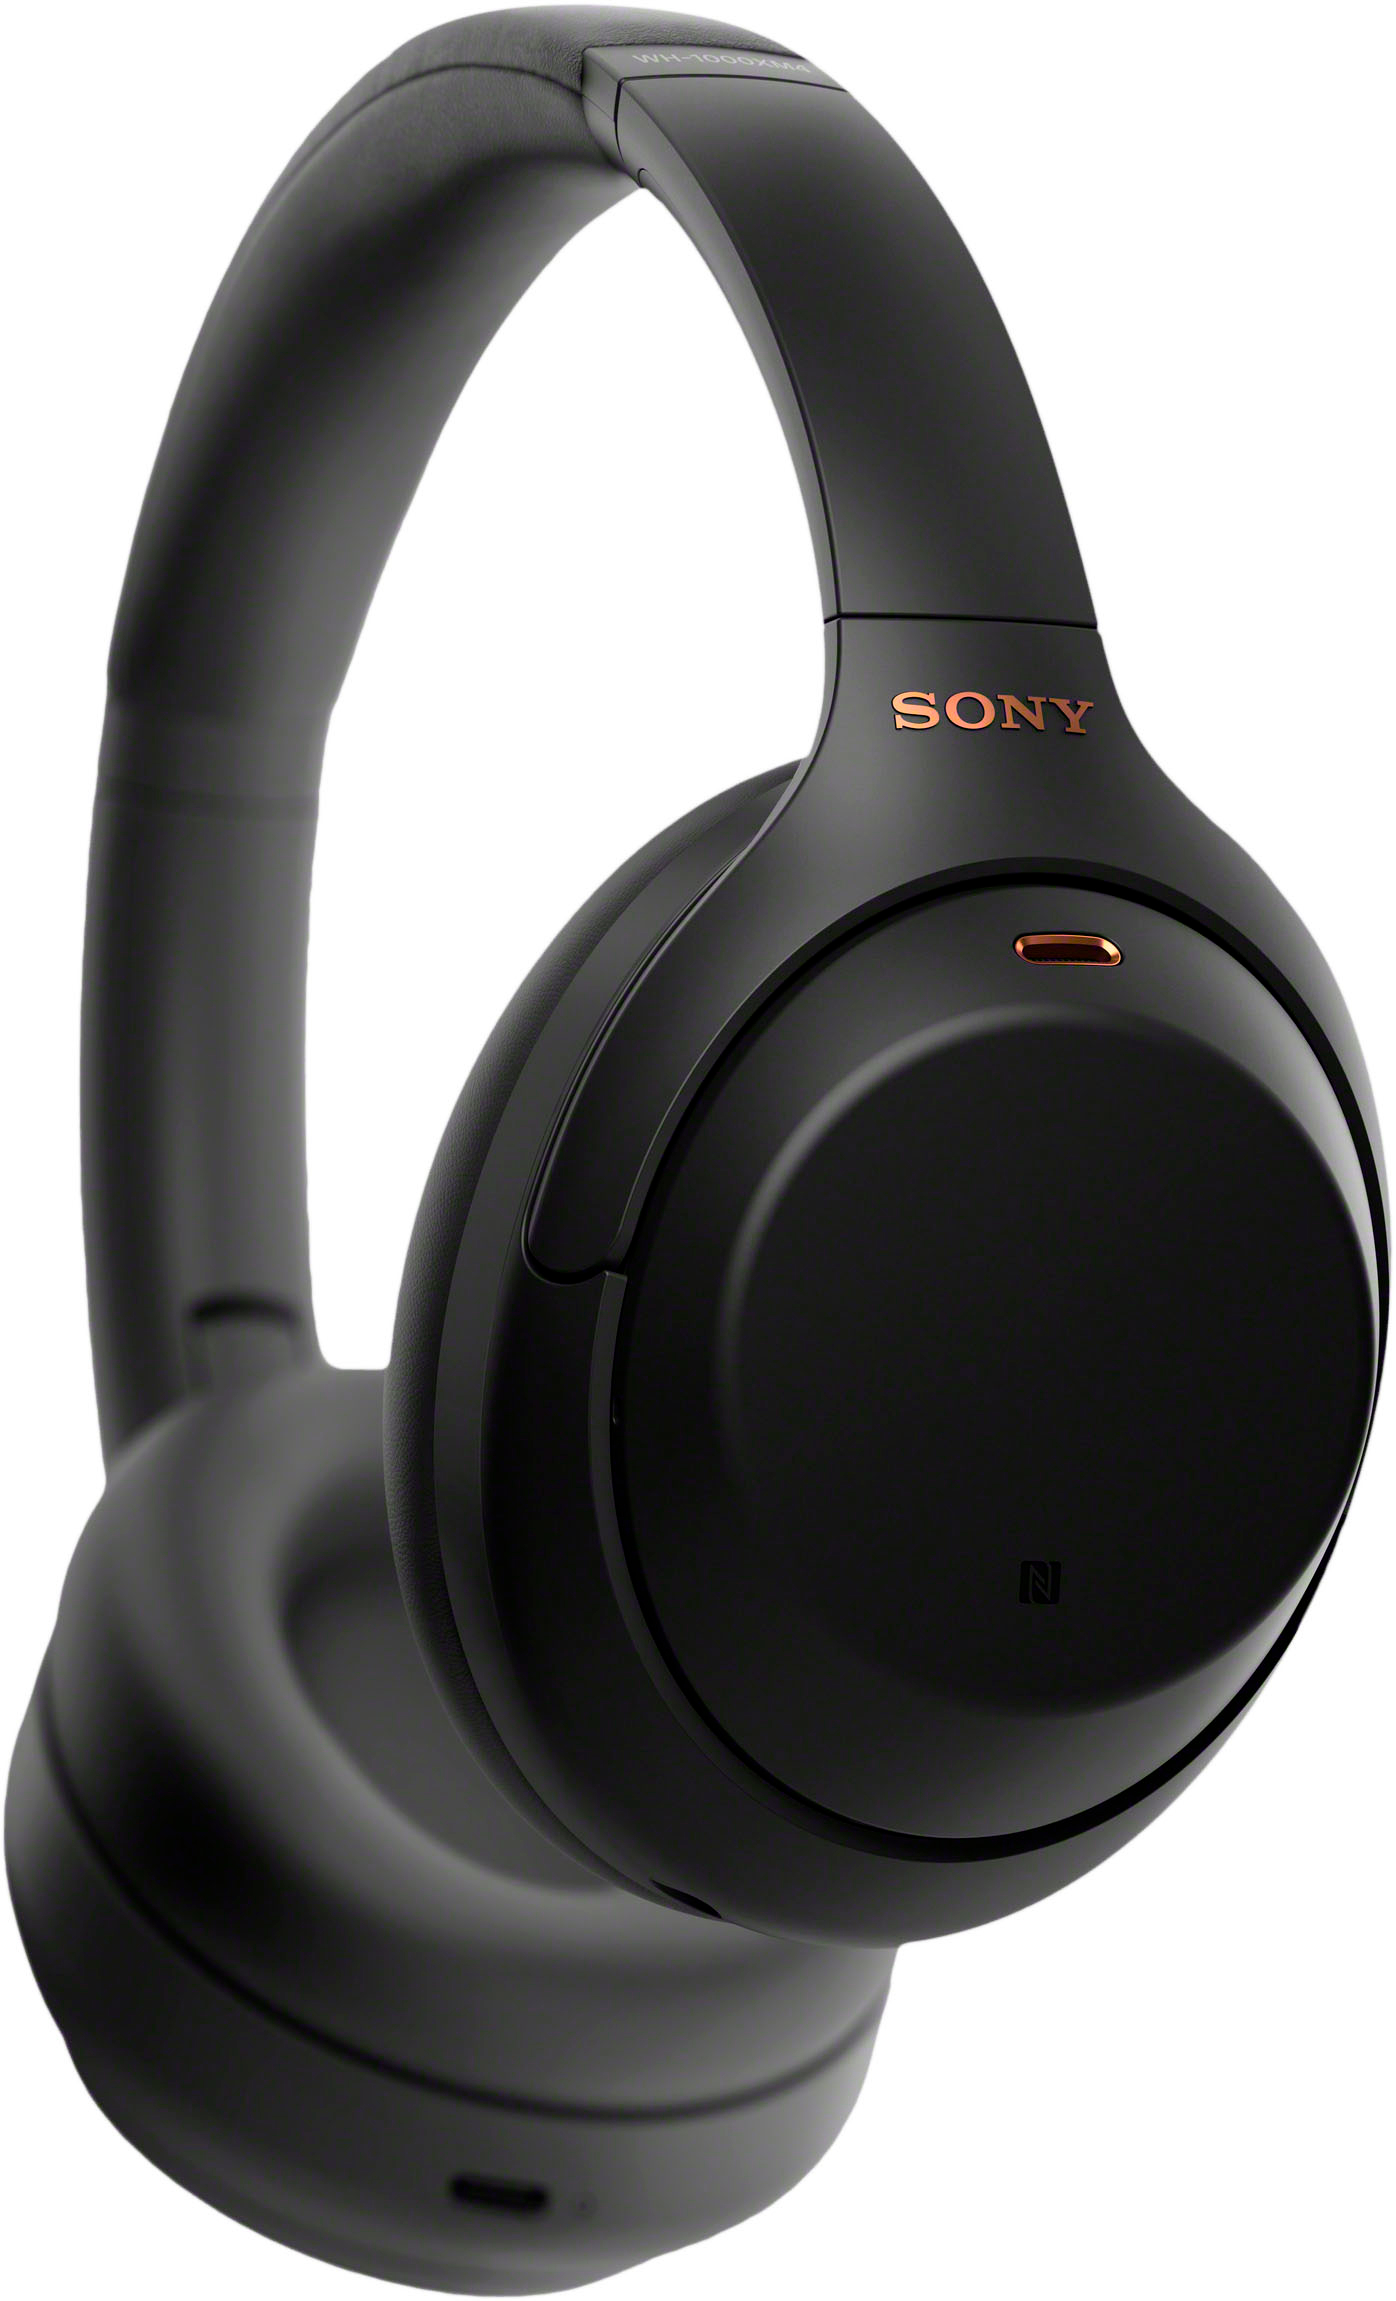 Sony WH1000XM4 Wireless Noise-Cancelling Over-the-Ear Headphones Black  WH1000XM4/B - Best Buy